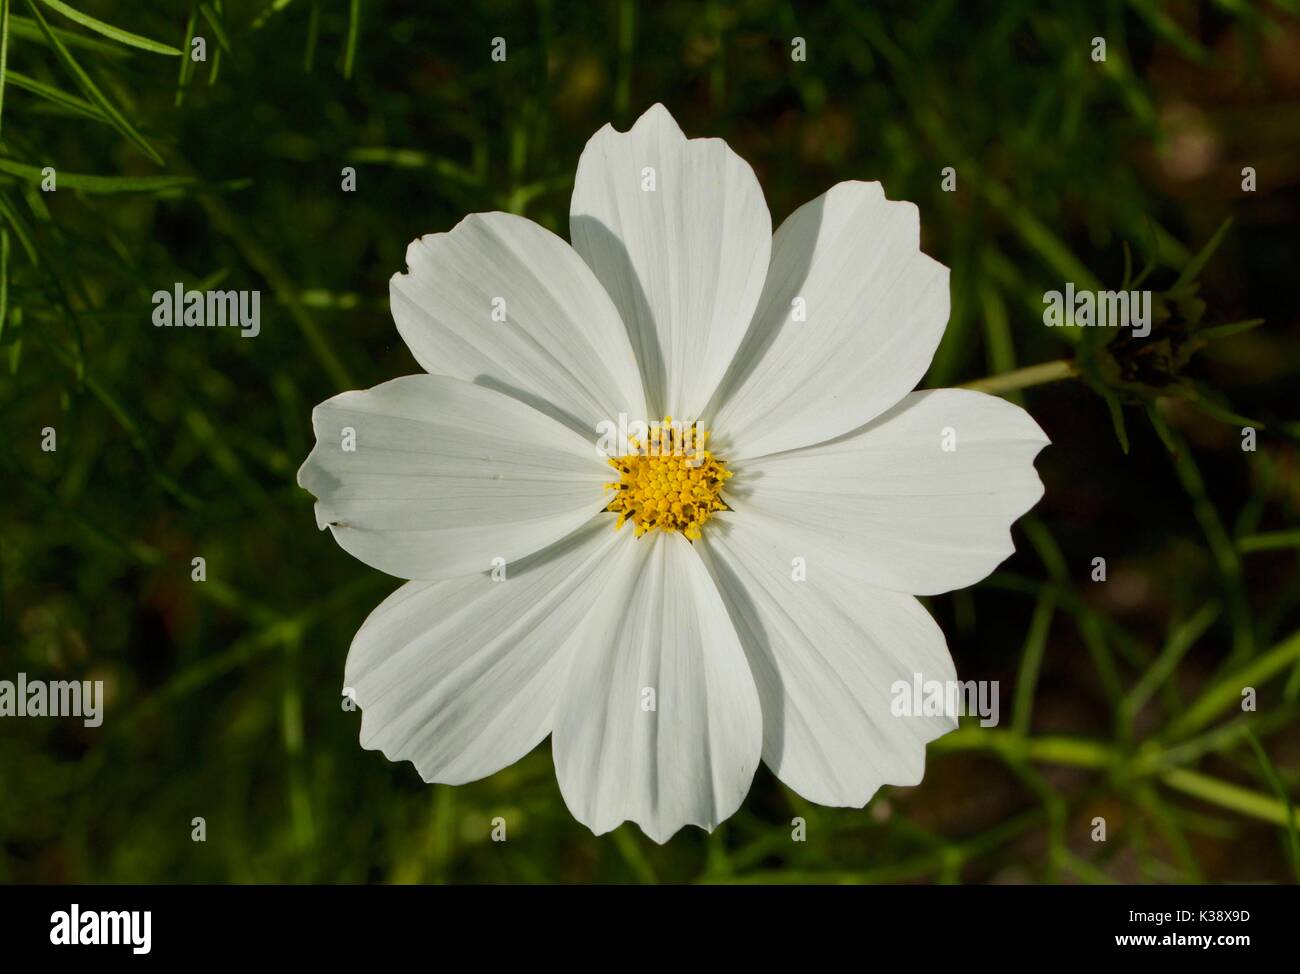 White daisy with yellow center and blurred green background Stock Photo